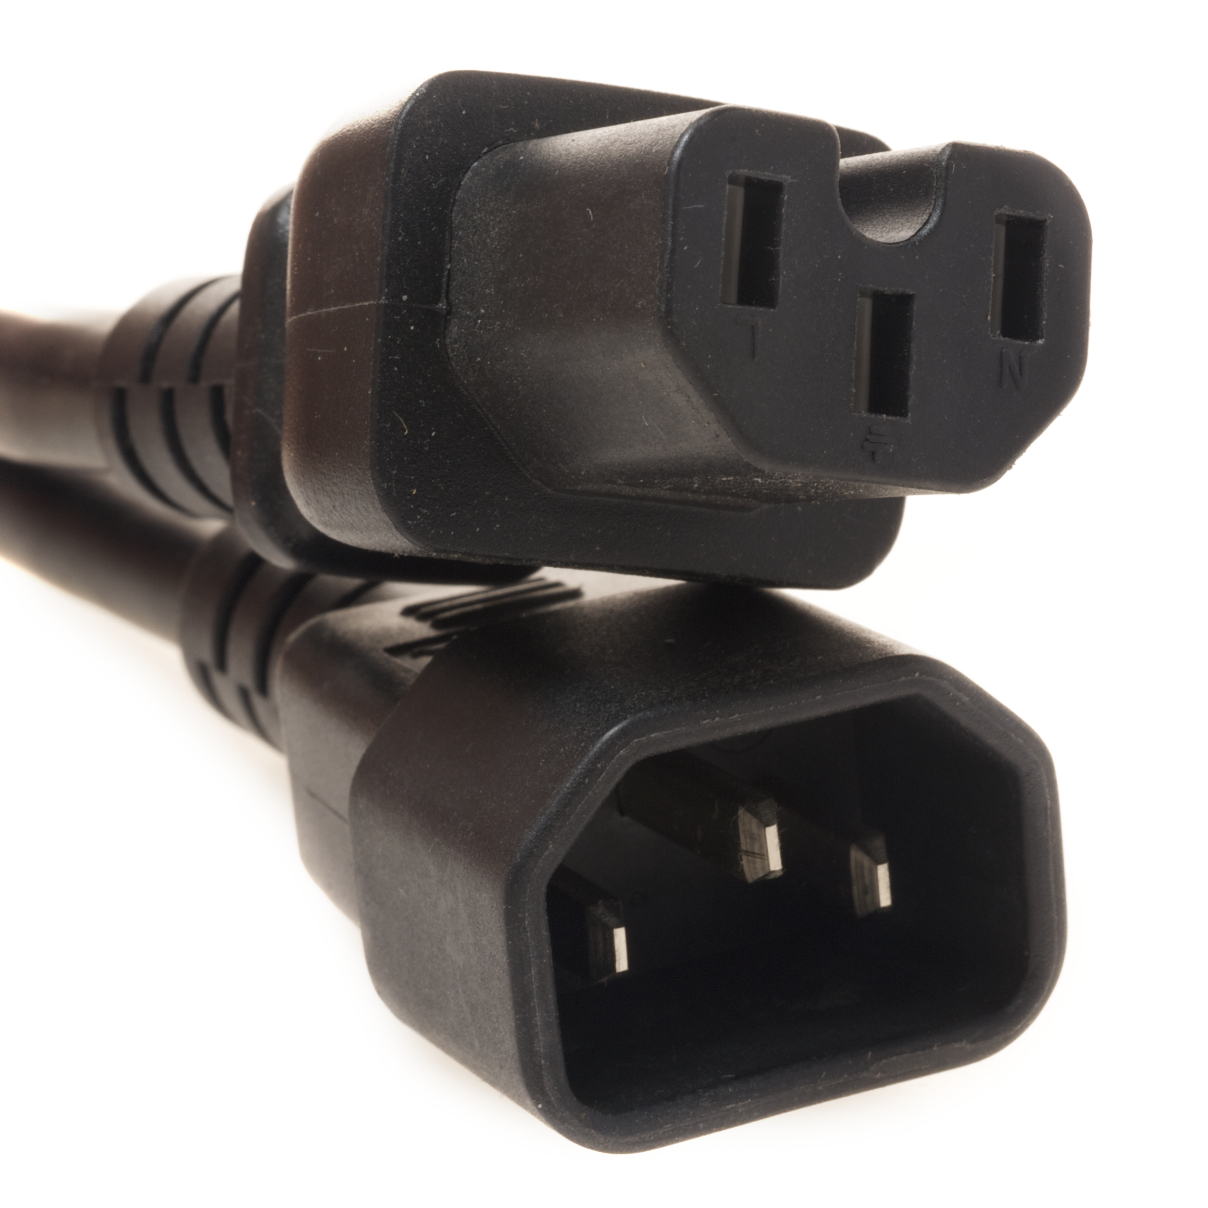 C14 to C15 PDU - Server Power Cord 14awg 15amp - 6 Ft